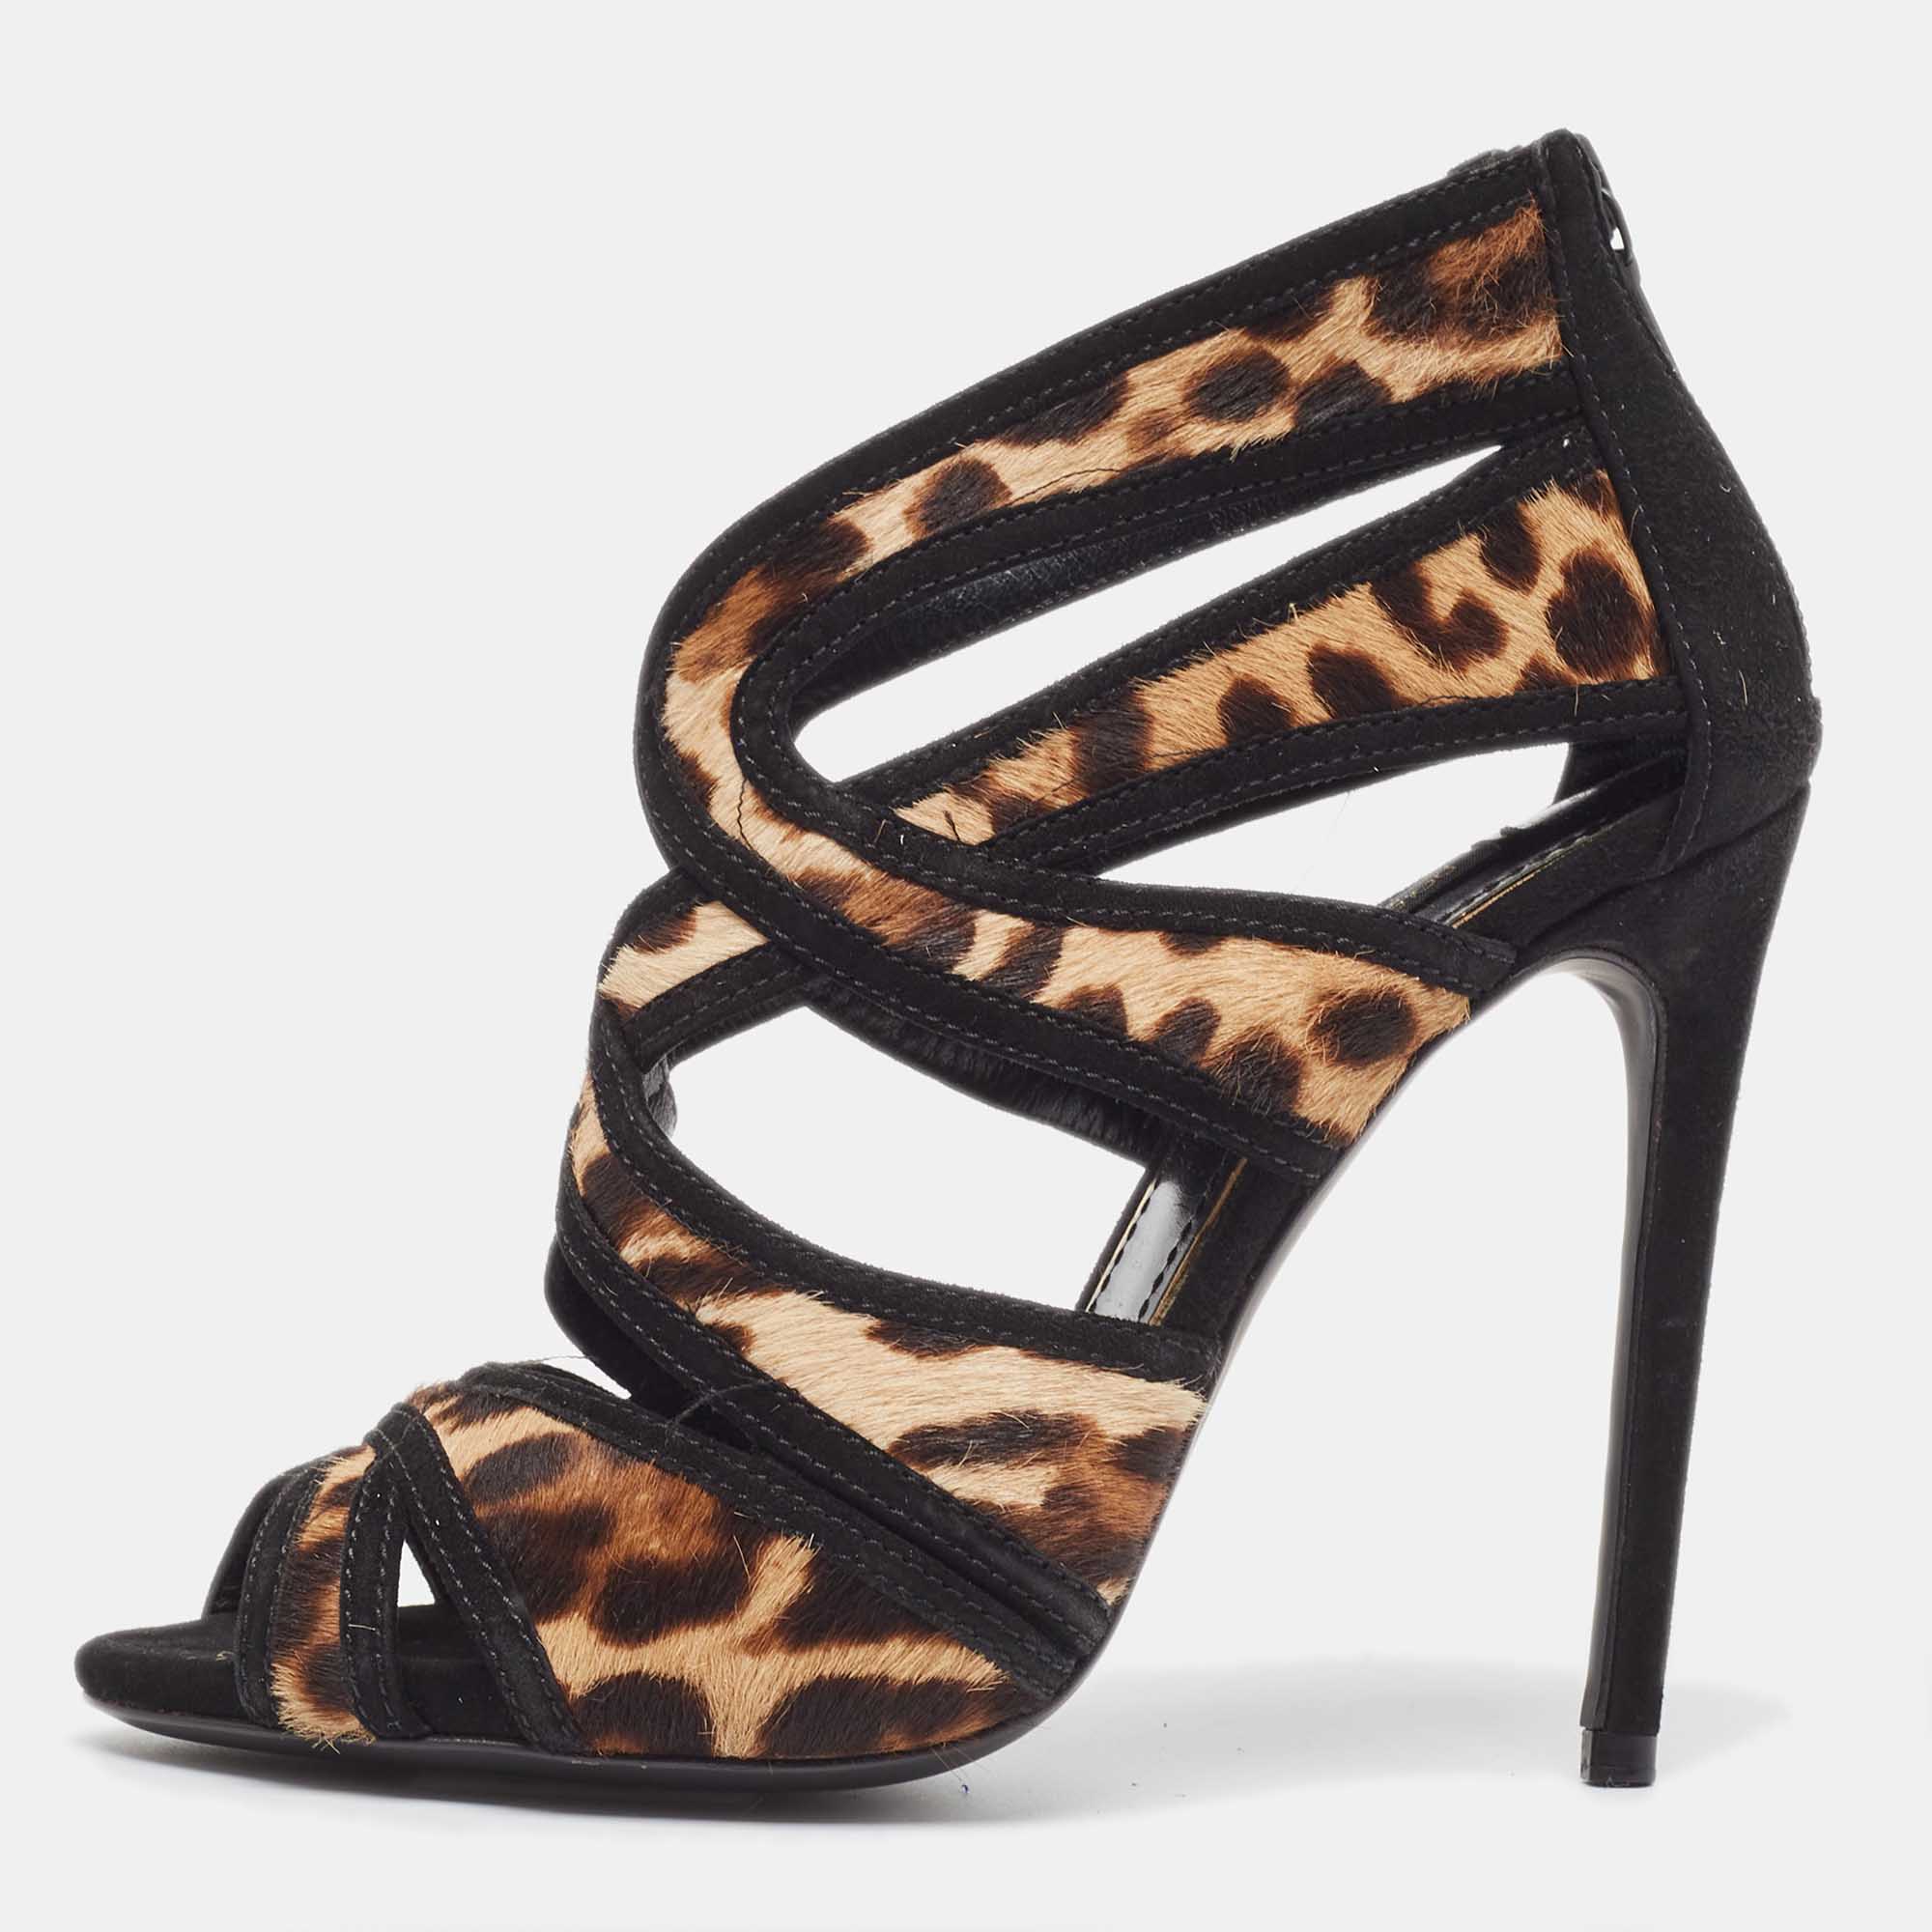 Pre-owned Dolce & Gabbana Beige/black Leopard Print Calf Hair And Suede Peep Toe Sandals Size 36.5